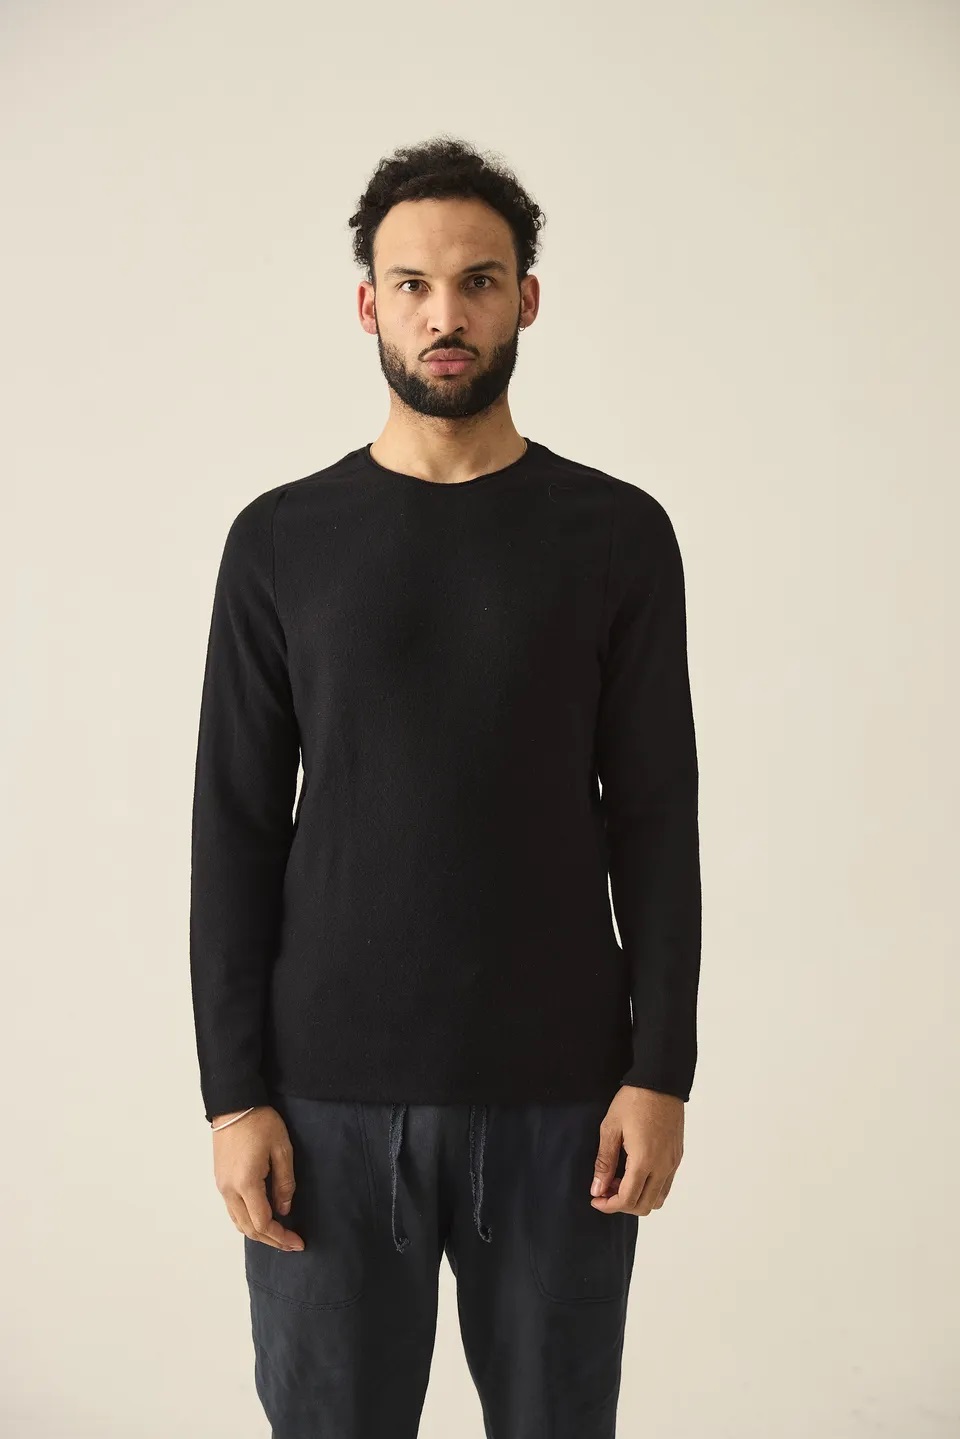 HANNIBAL. Knit Pullover Nevio in Charcoal